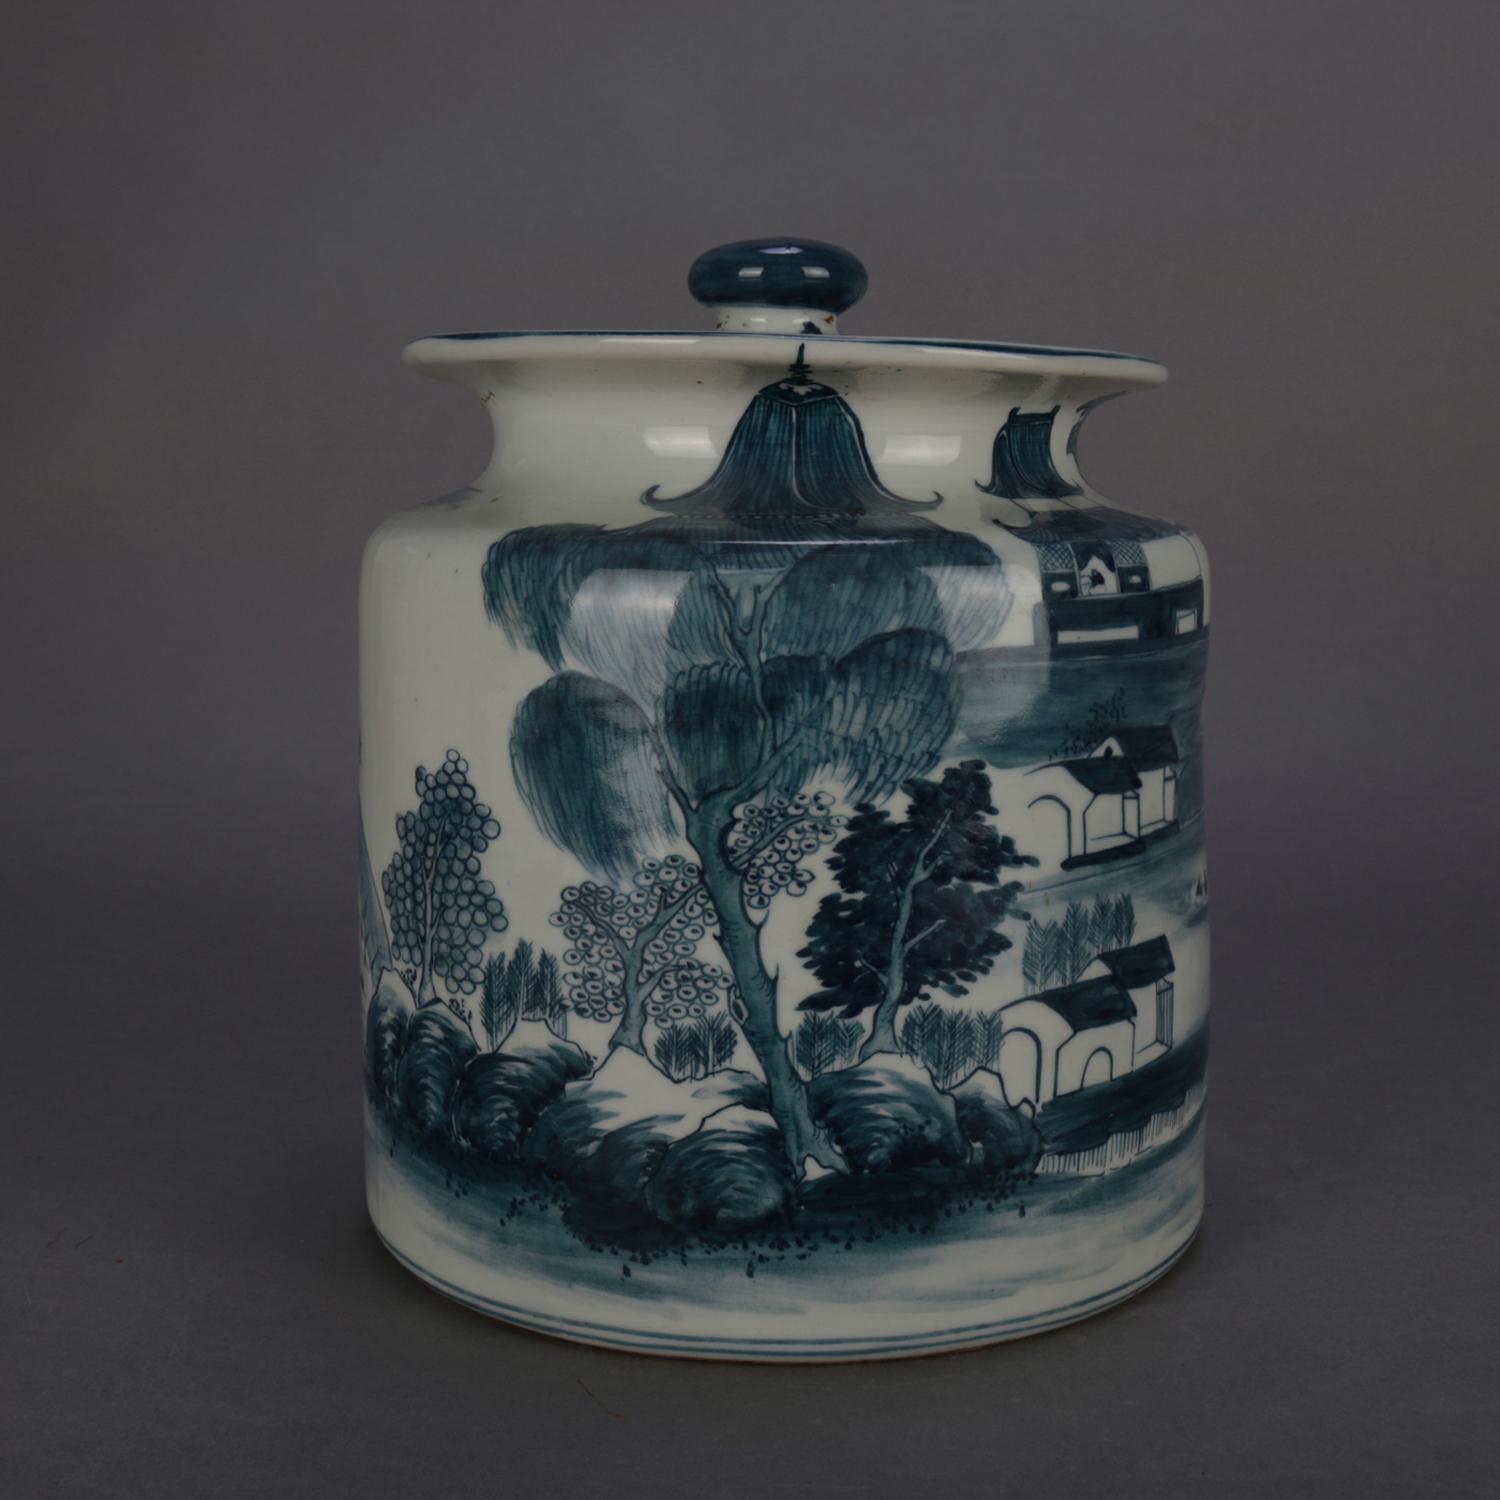 An Asian Canton School pictorial porcelain covered jar features hand painted village scene in blue and white, chop mark signed on base, 20th century

Measures: 10.25